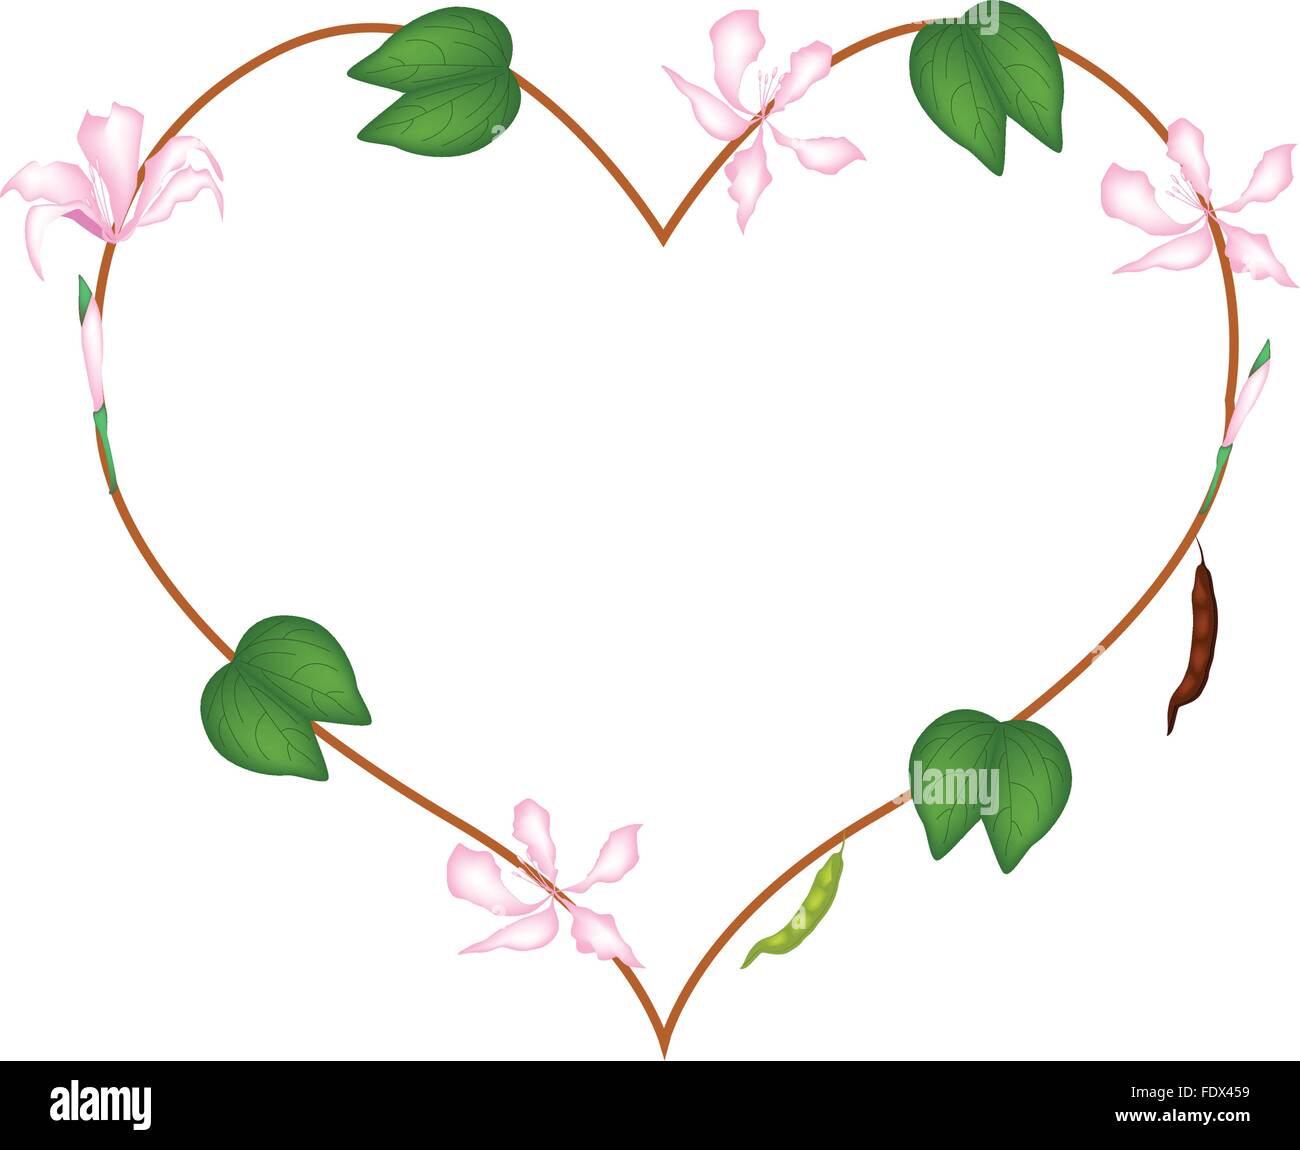 Love Concept, Illustration of Pink Bauhinia Purpurea Flowers Forming in Heart Shape Isolated on White Background. Stock Vector